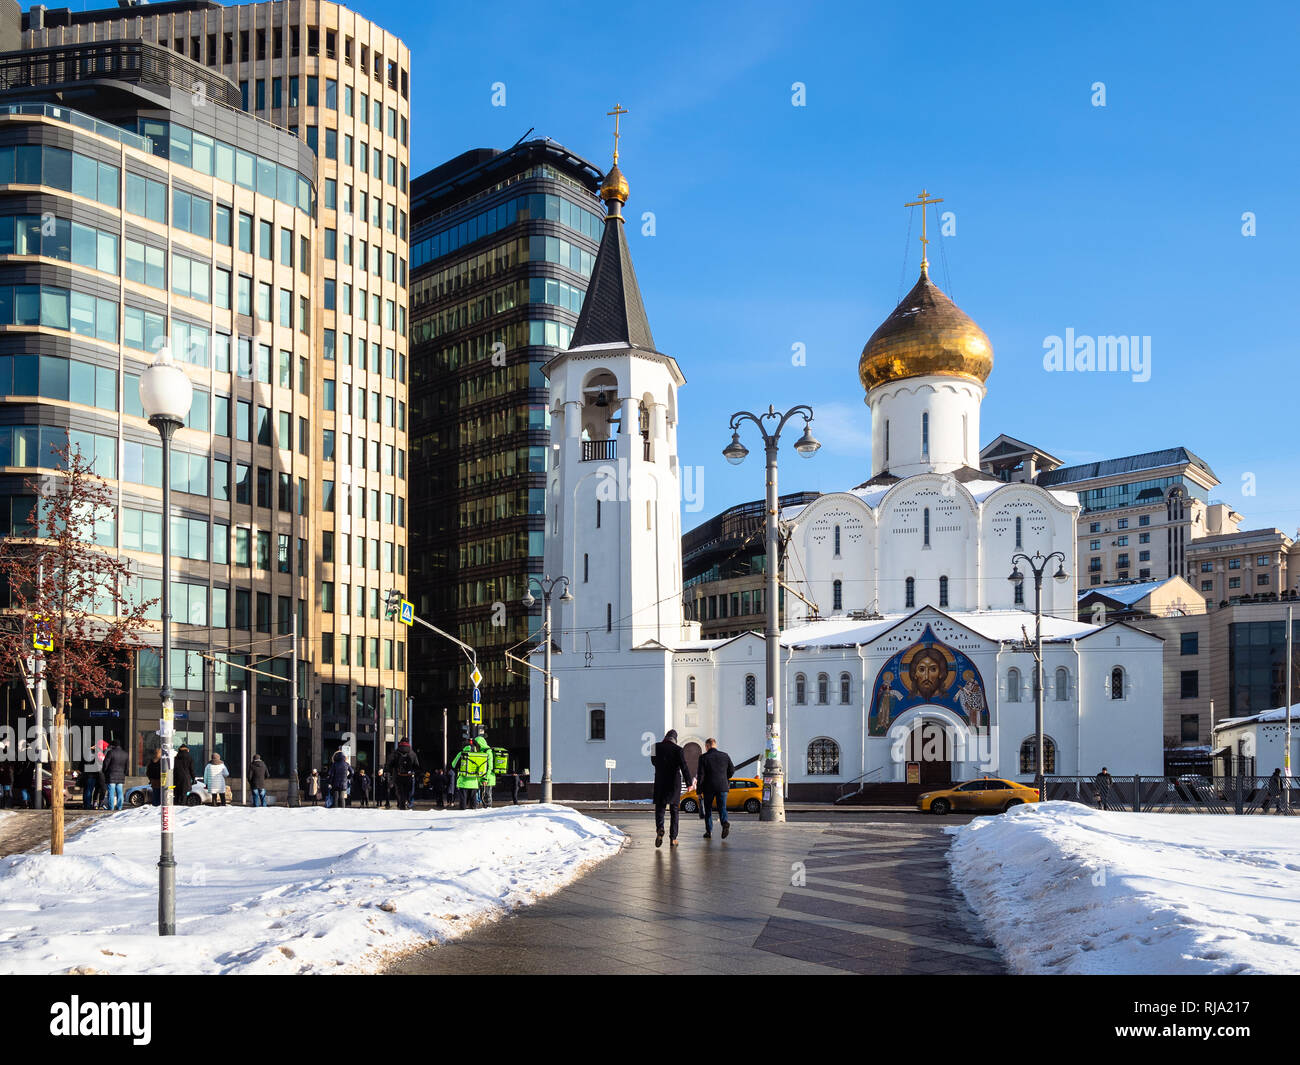 MOSCOW, RUSSIA - JANUARY 25, 2019: people near Church of St Nicholas the Wonderworker at Tverskaya Outpost (Church of Saint Nicholas in the Tver Old B Stock Photo